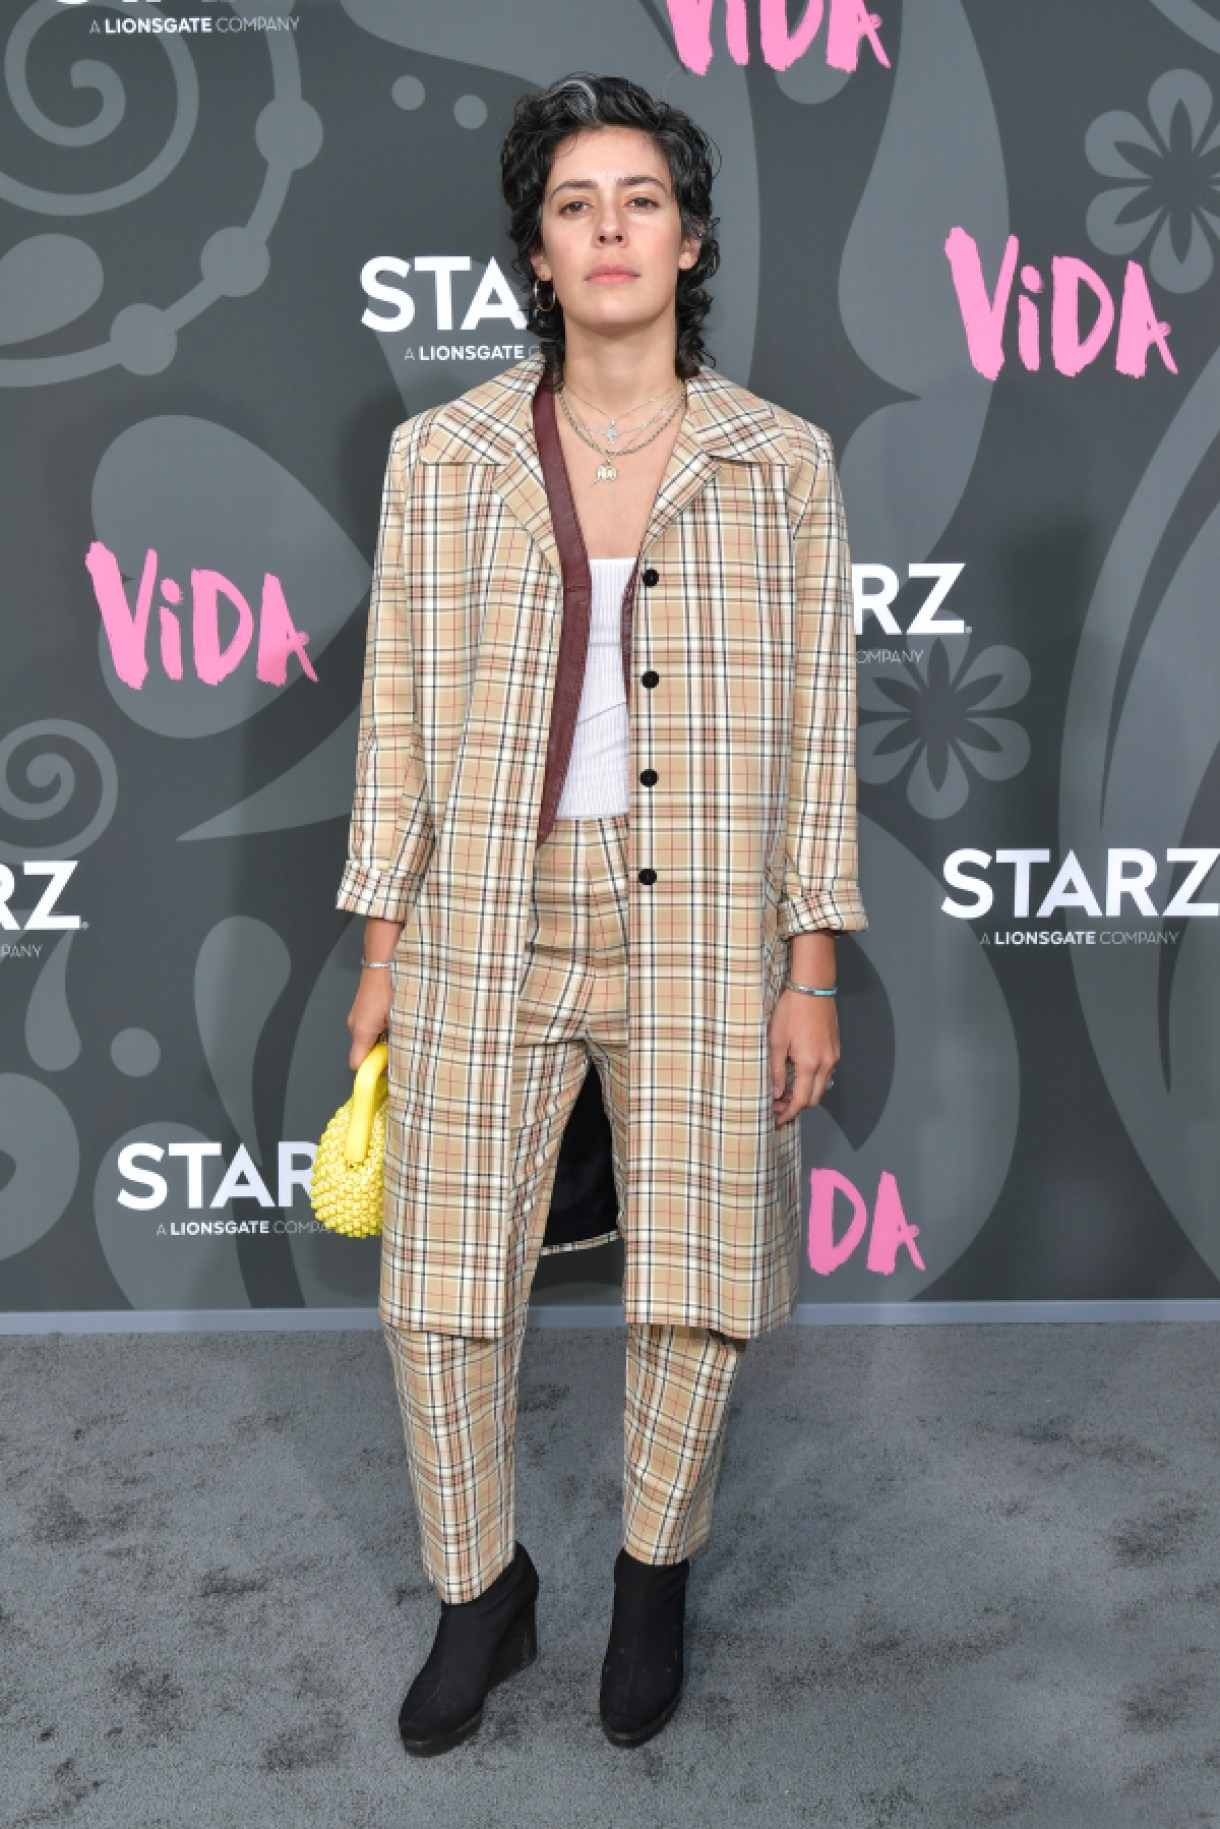 Roberta Colindrez in a yellow and brown plaid suit attends LA Premiere Of Starz' "VIDA" at Regal Downtown Theater on May 20, 2019 in Los Angeles, California. (Photo by Amy Sussman/Getty Images)